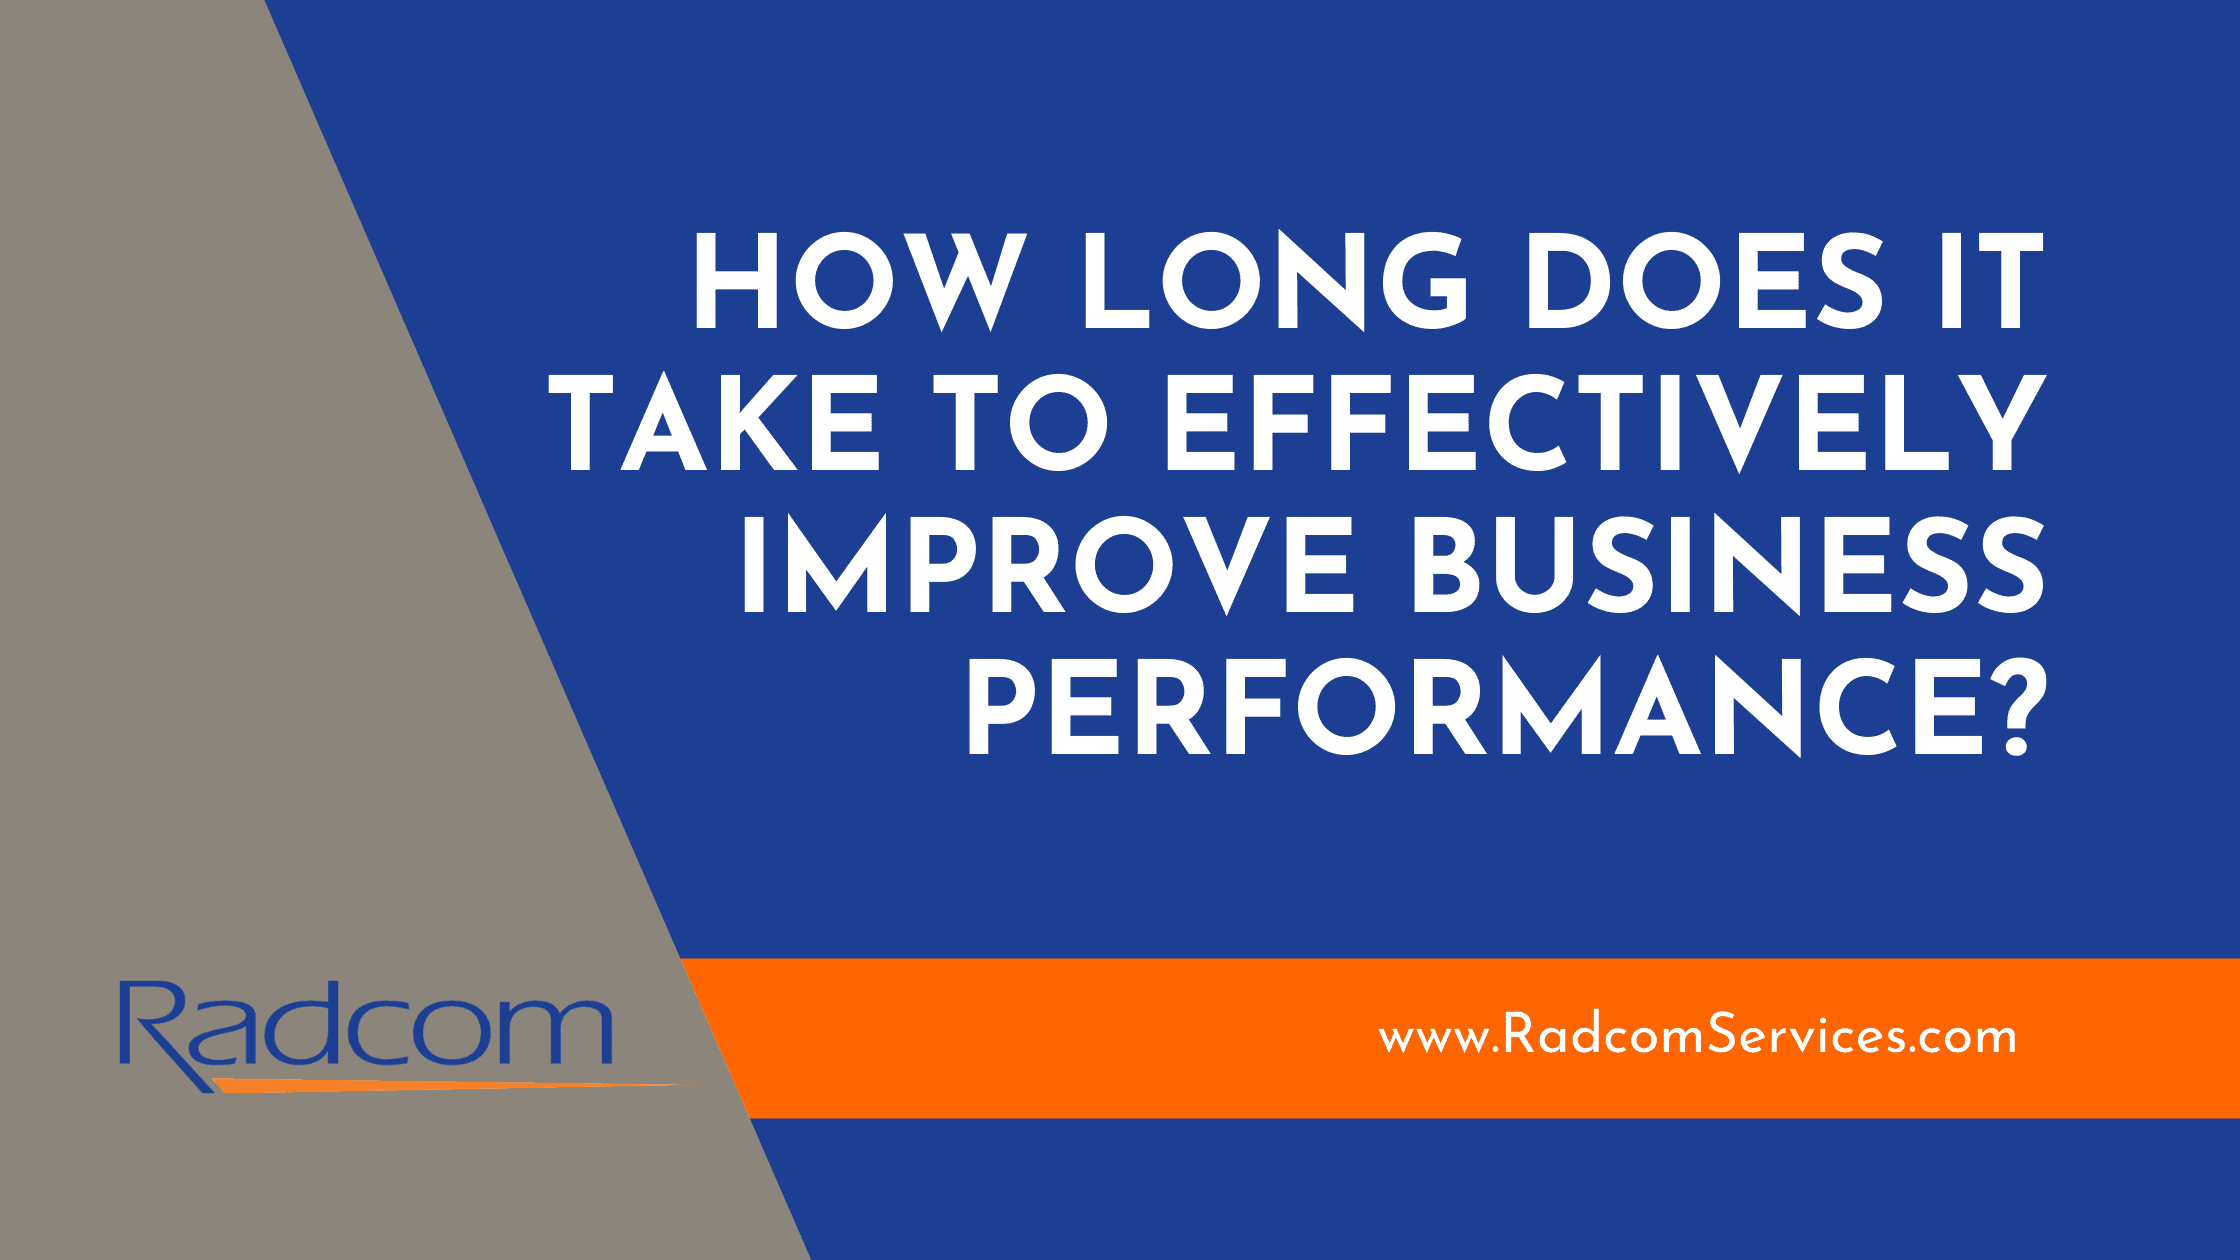 How Long Does It Take to Effectively Improve Business Performance